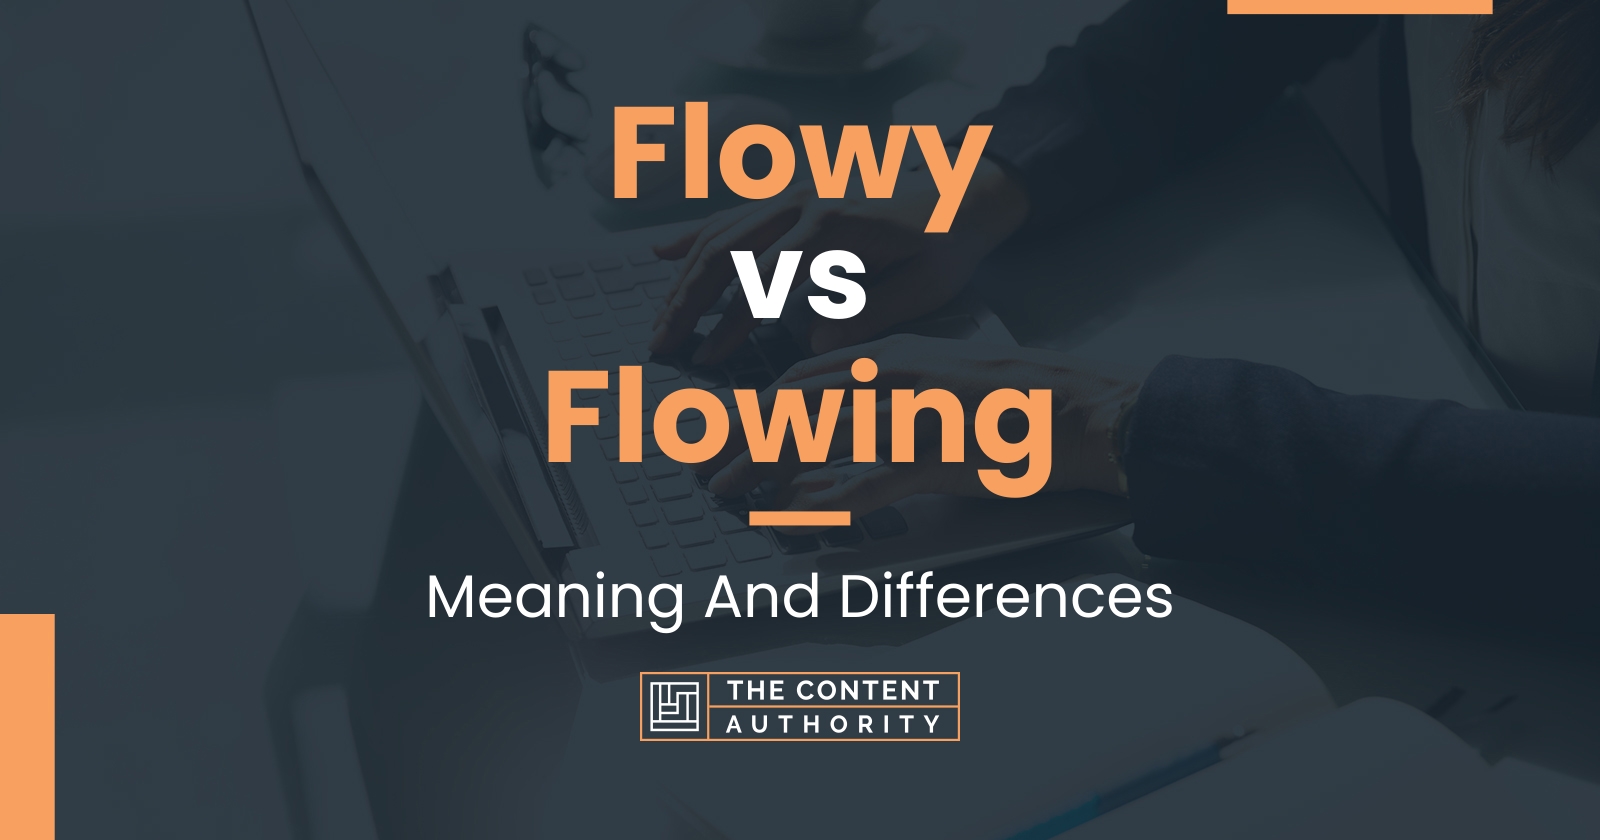 Flowy vs Flowing: Meaning And Differences